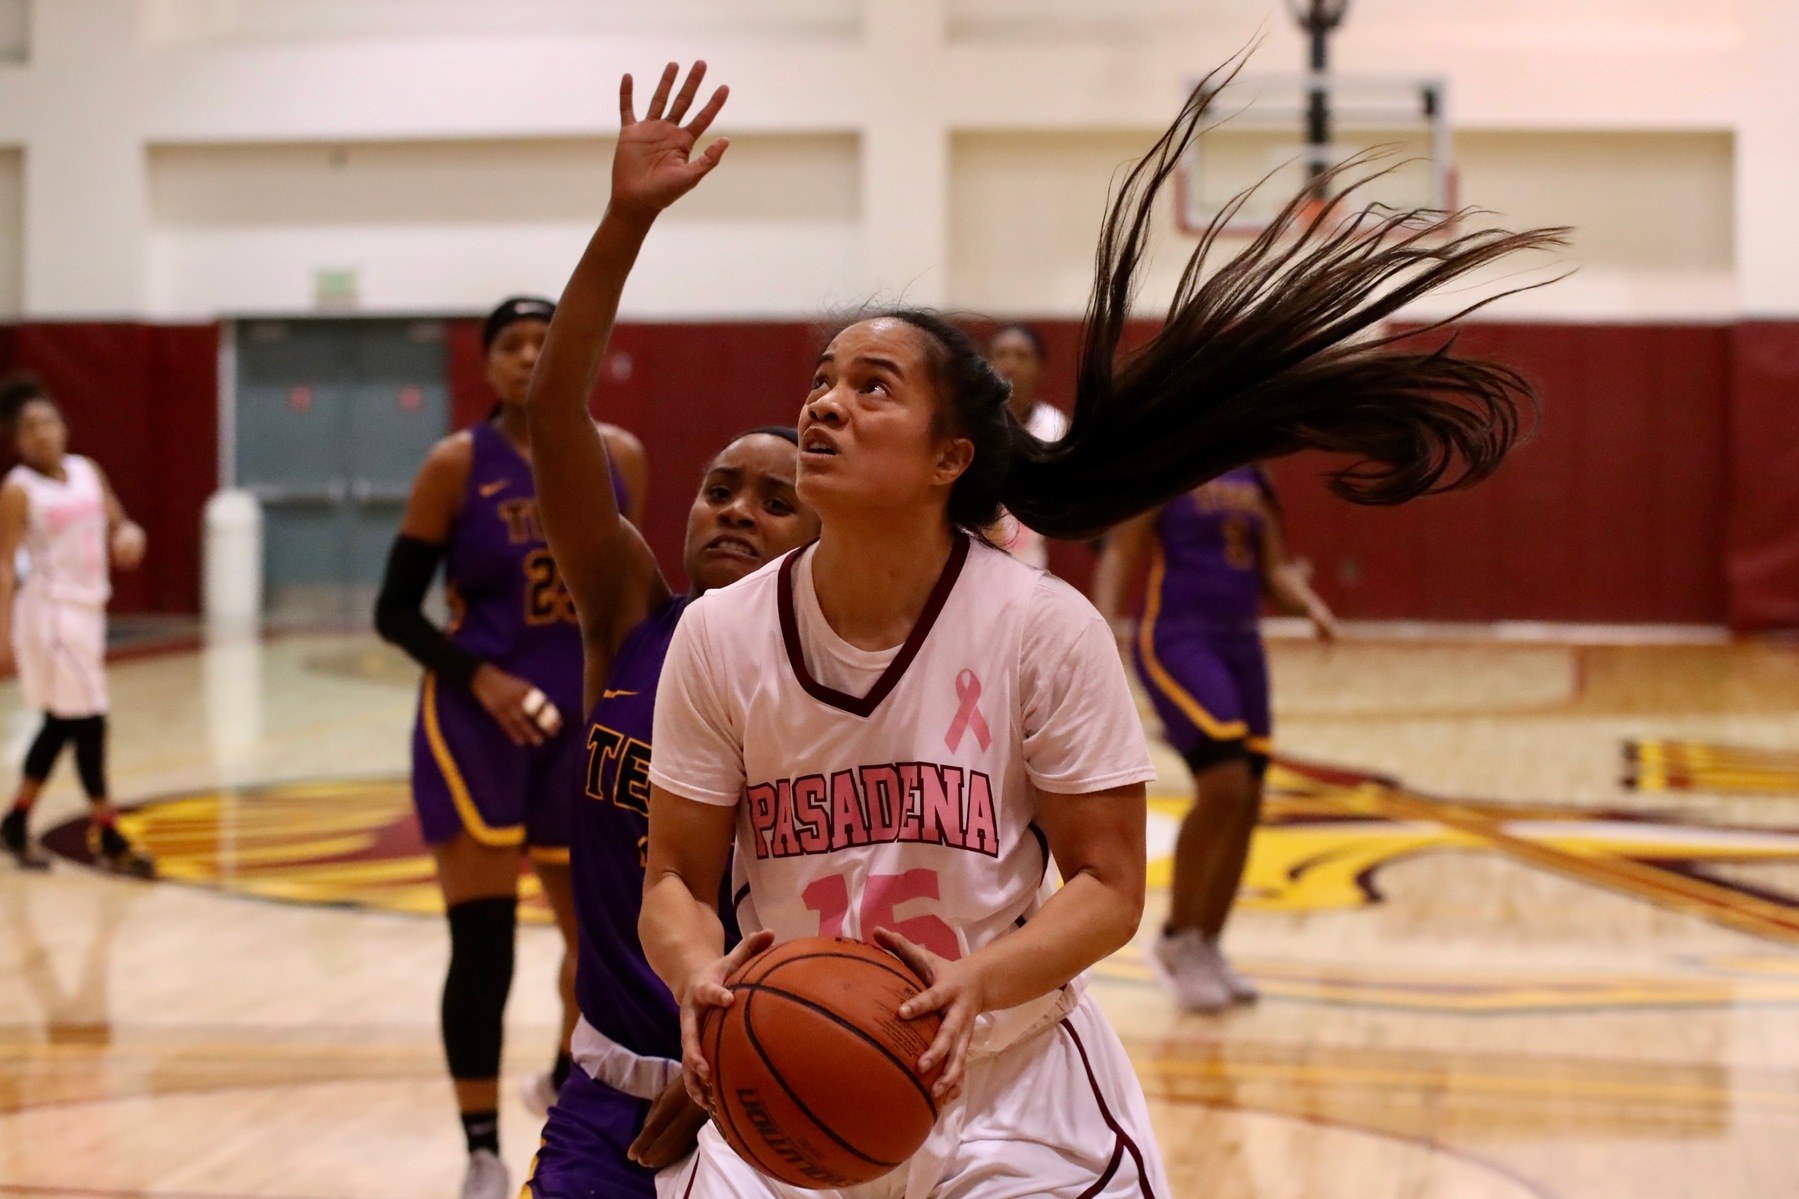 Merina Latu, wearing PCC's Cancer Awareness home jersey, goes to the hoop during Wednesday's win, photo by Michael Watkins.